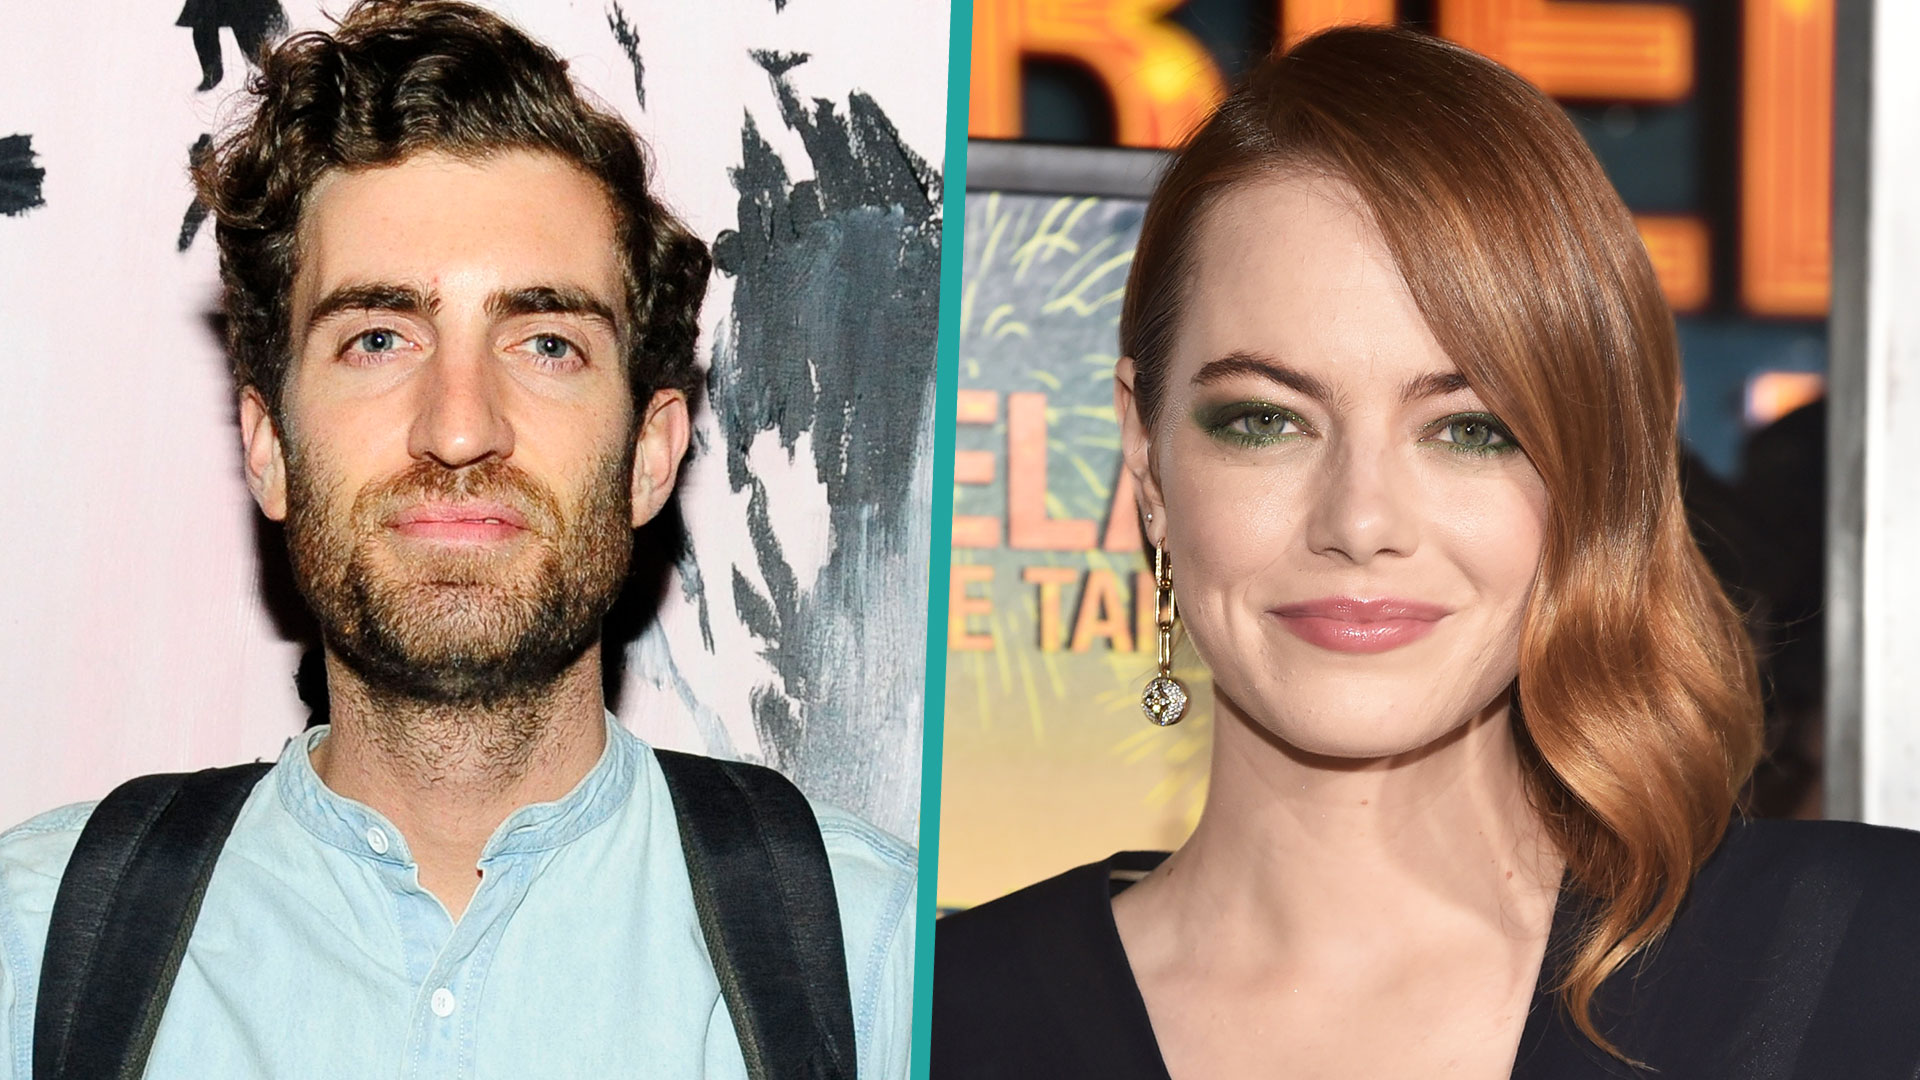 who did emma stone get engagex to